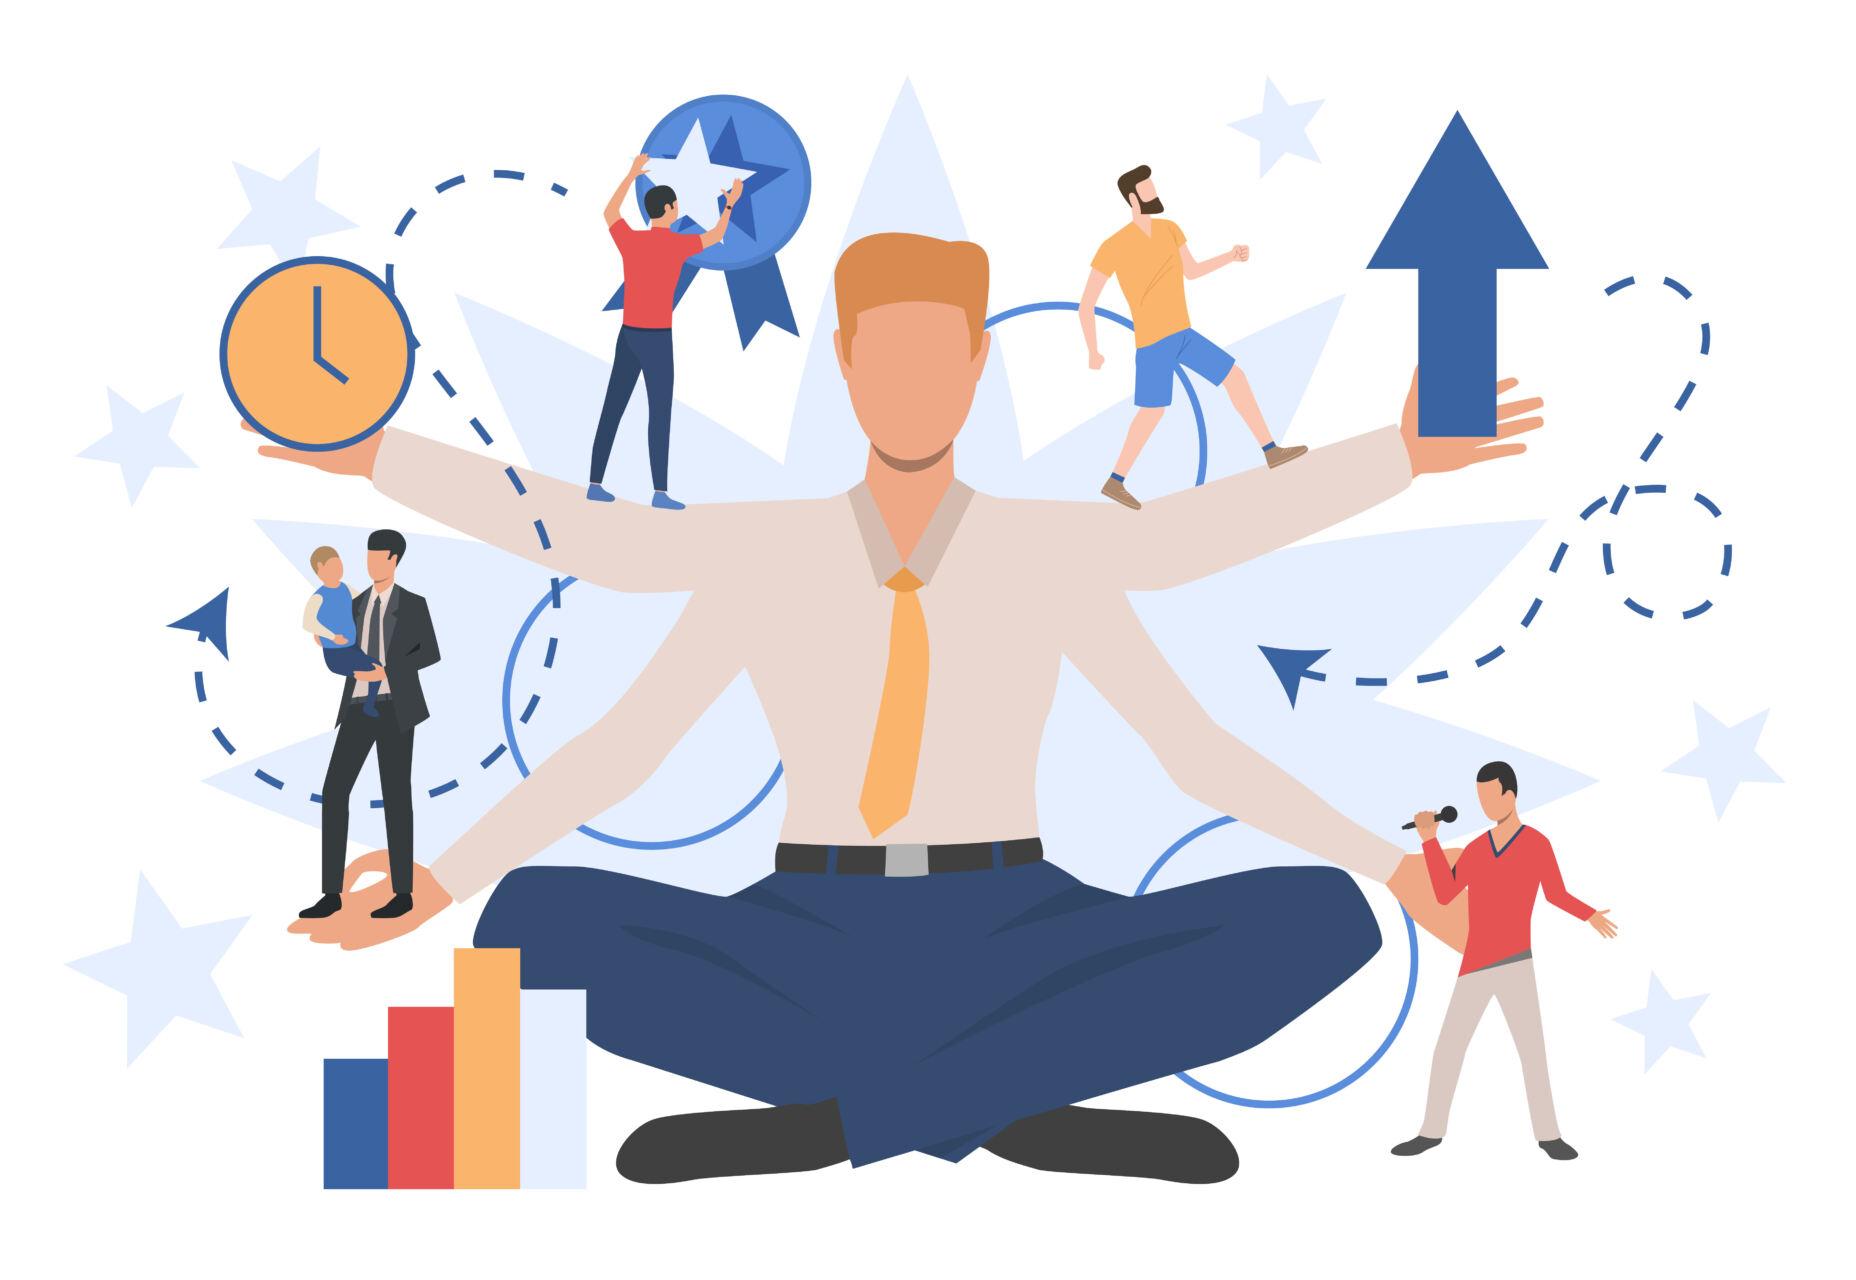 Businessman character showing different social roles. Work, family, leisure. Can be used for topics like activity, lifestyle, multitasking. Designed by katemangostar / Freepik